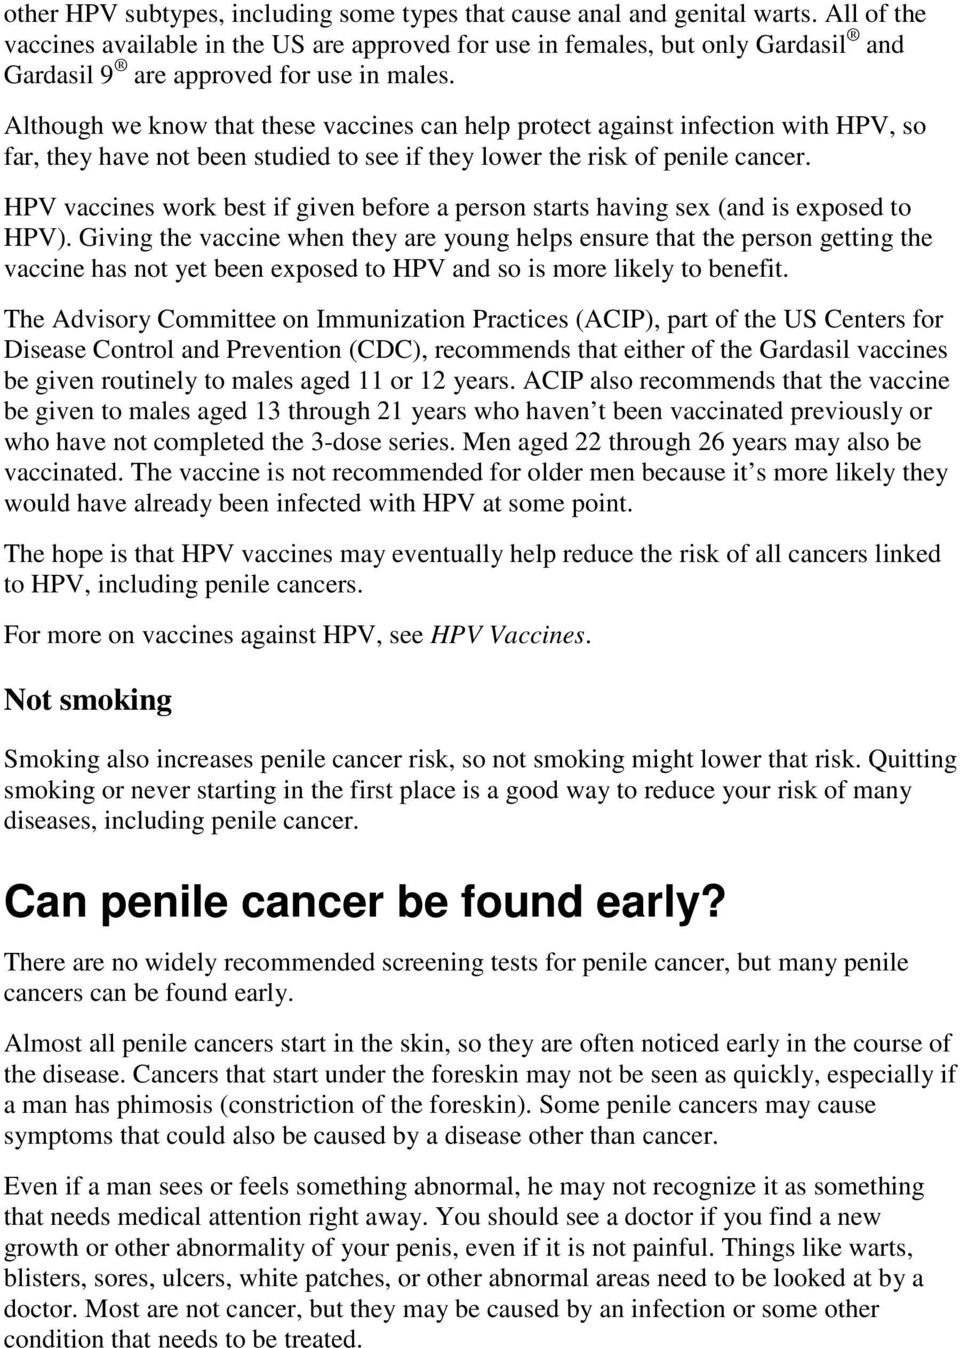 Although we know that these vaccines can help protect against infection with HPV, so far, they have not been studied to see if they lower the risk of penile cancer.